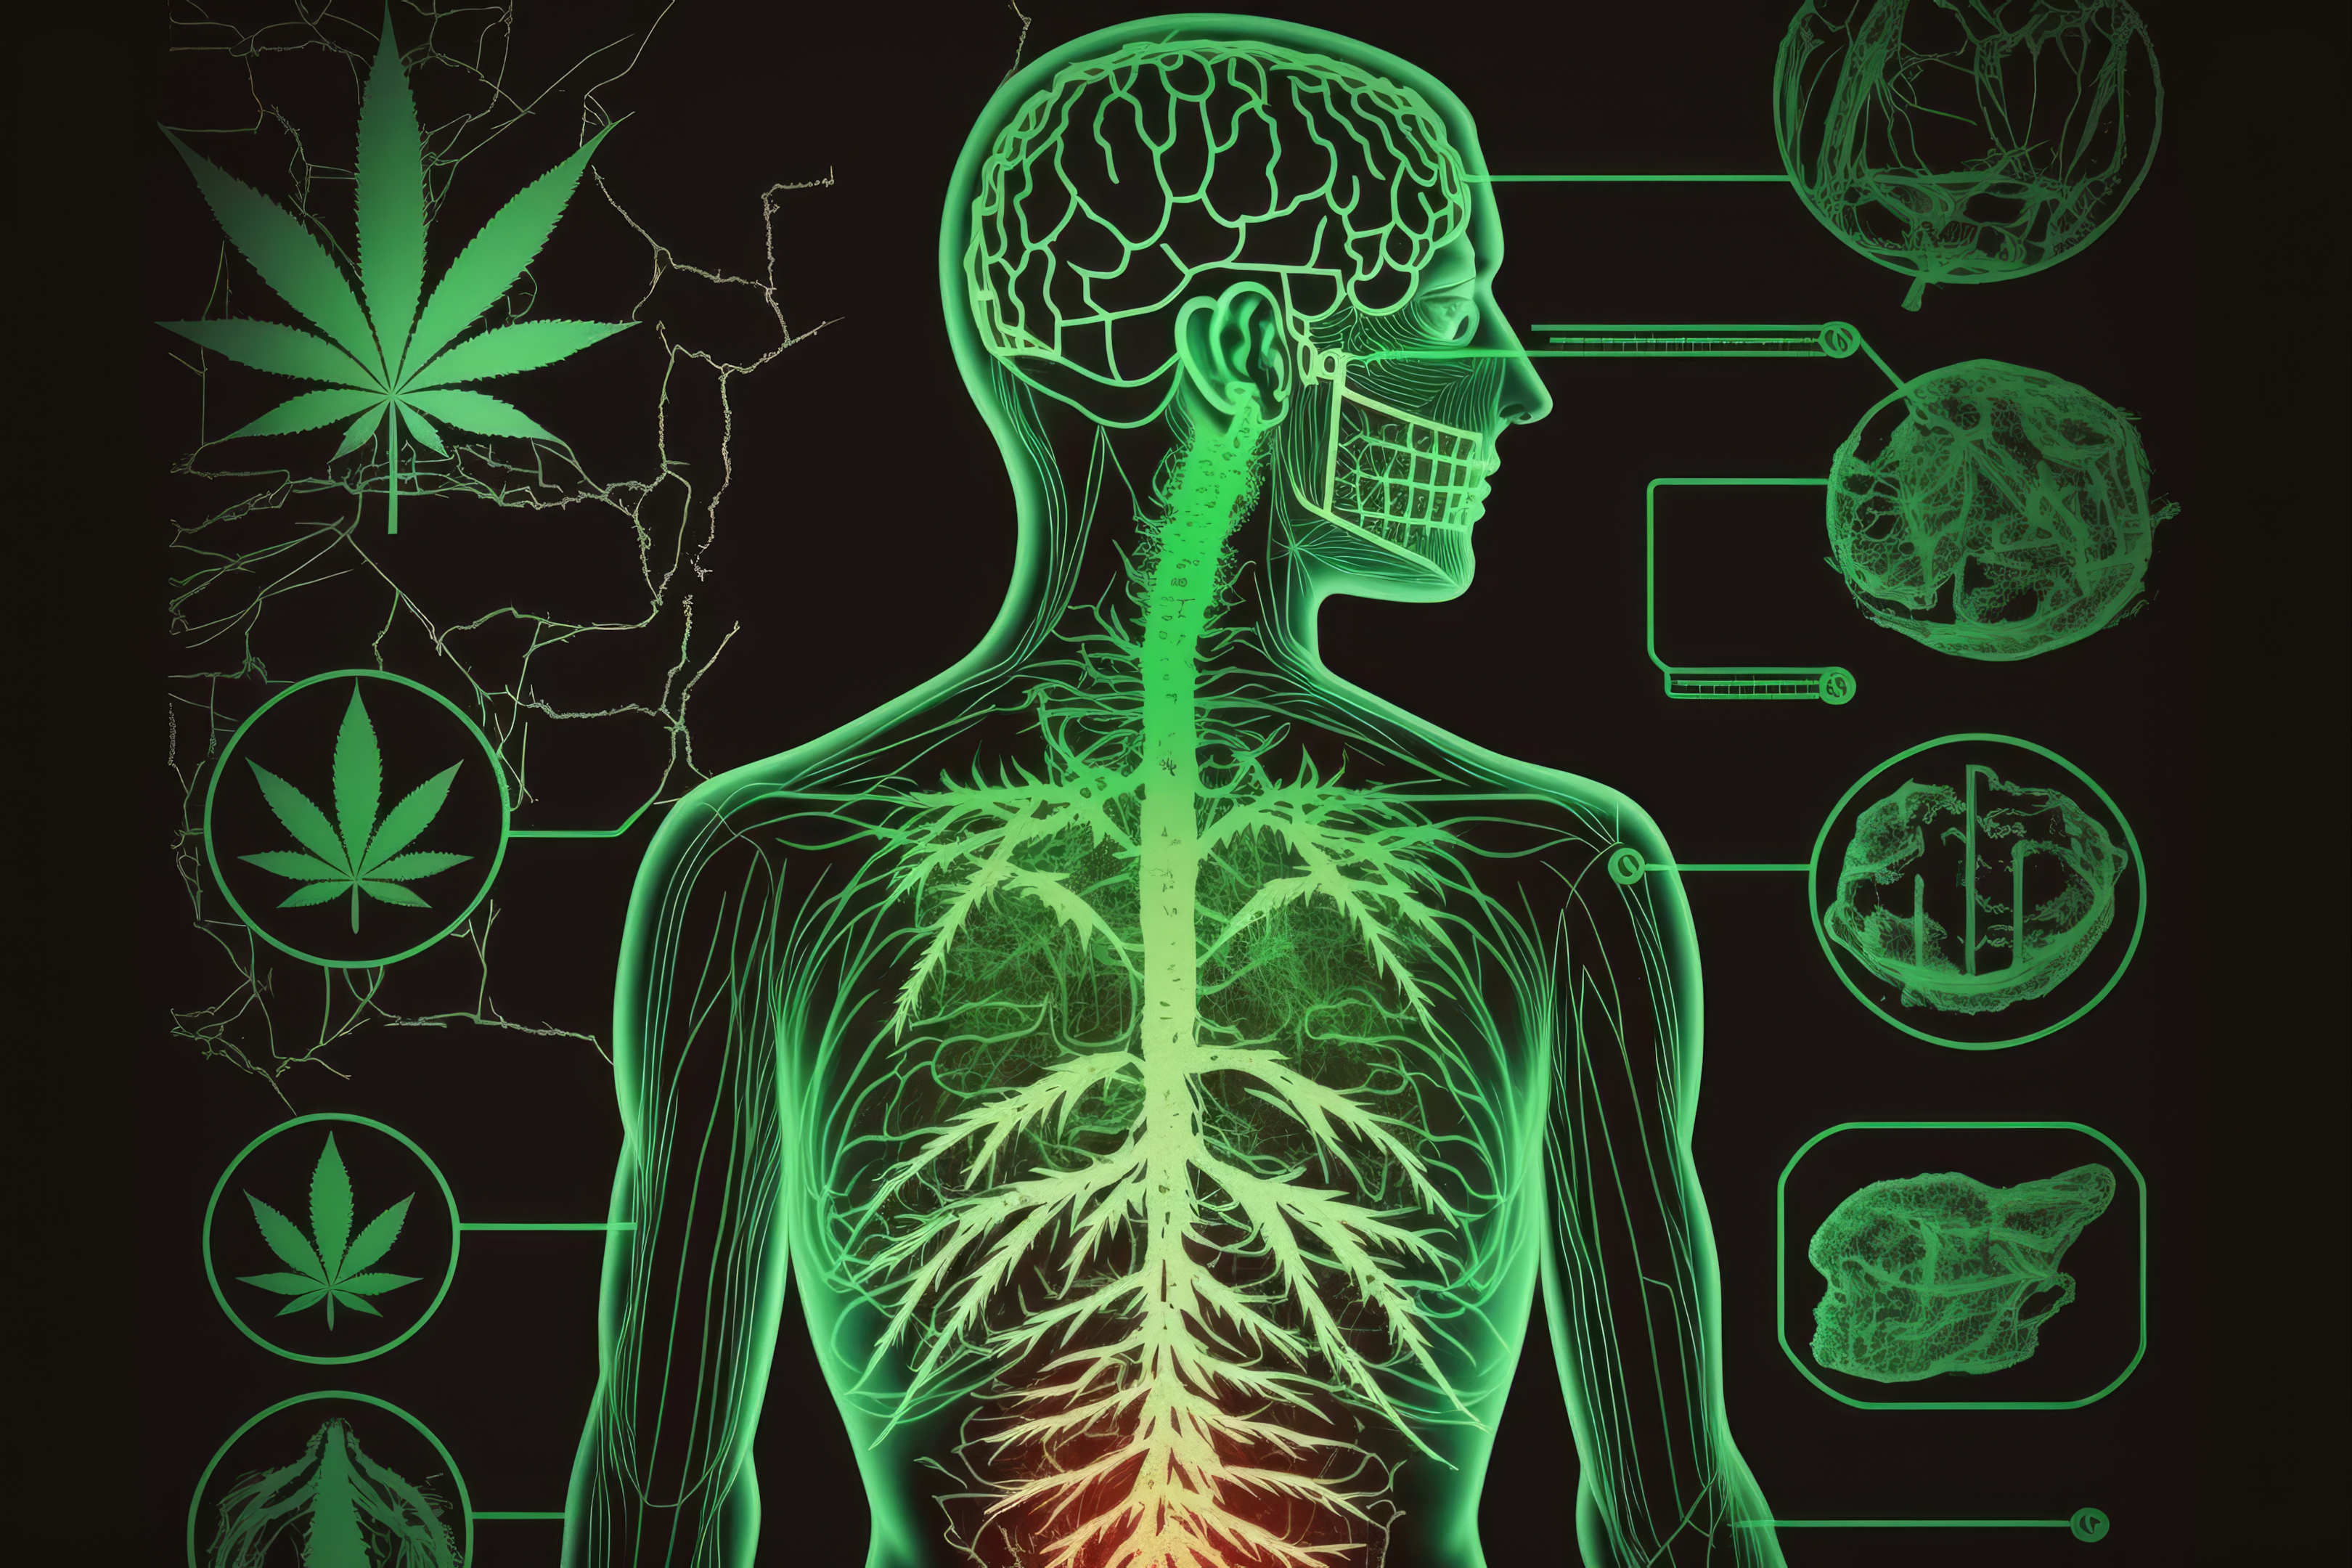 A new study proposed a blockage of the sensation of being full amongst patients. These power plants (drugs as some would say), kick in up to two hours, and may affect a cannabinoid receptor relating to pain sensitivity and smell as well.